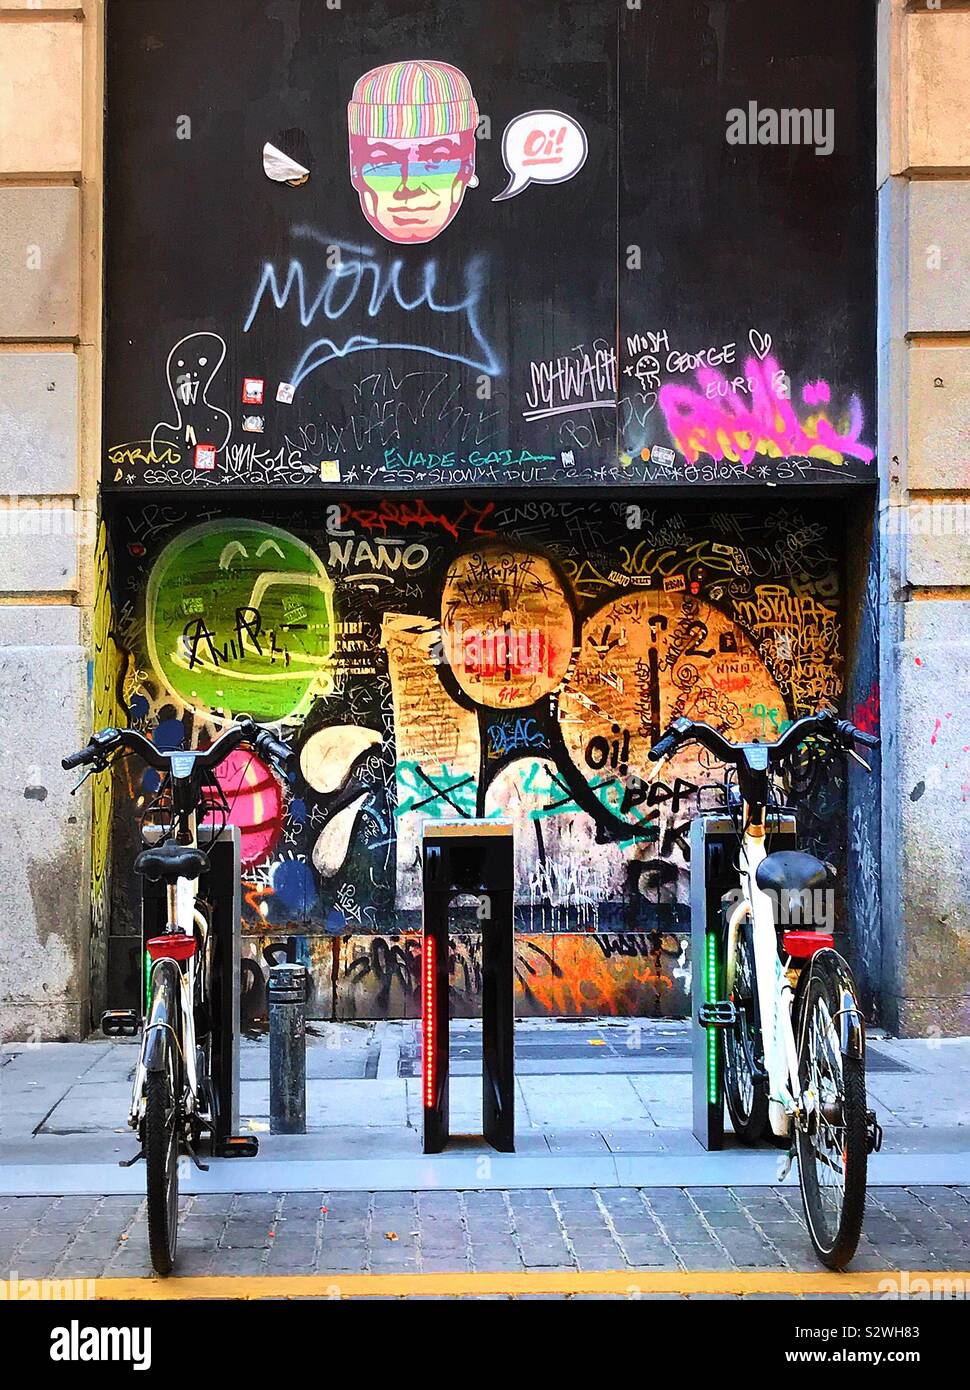 Electric bicycles in their docking stations in Madrid’s trendy district of Malasaña. In the background the wall is covered with an array of graffiti and stickers. Stock Photo